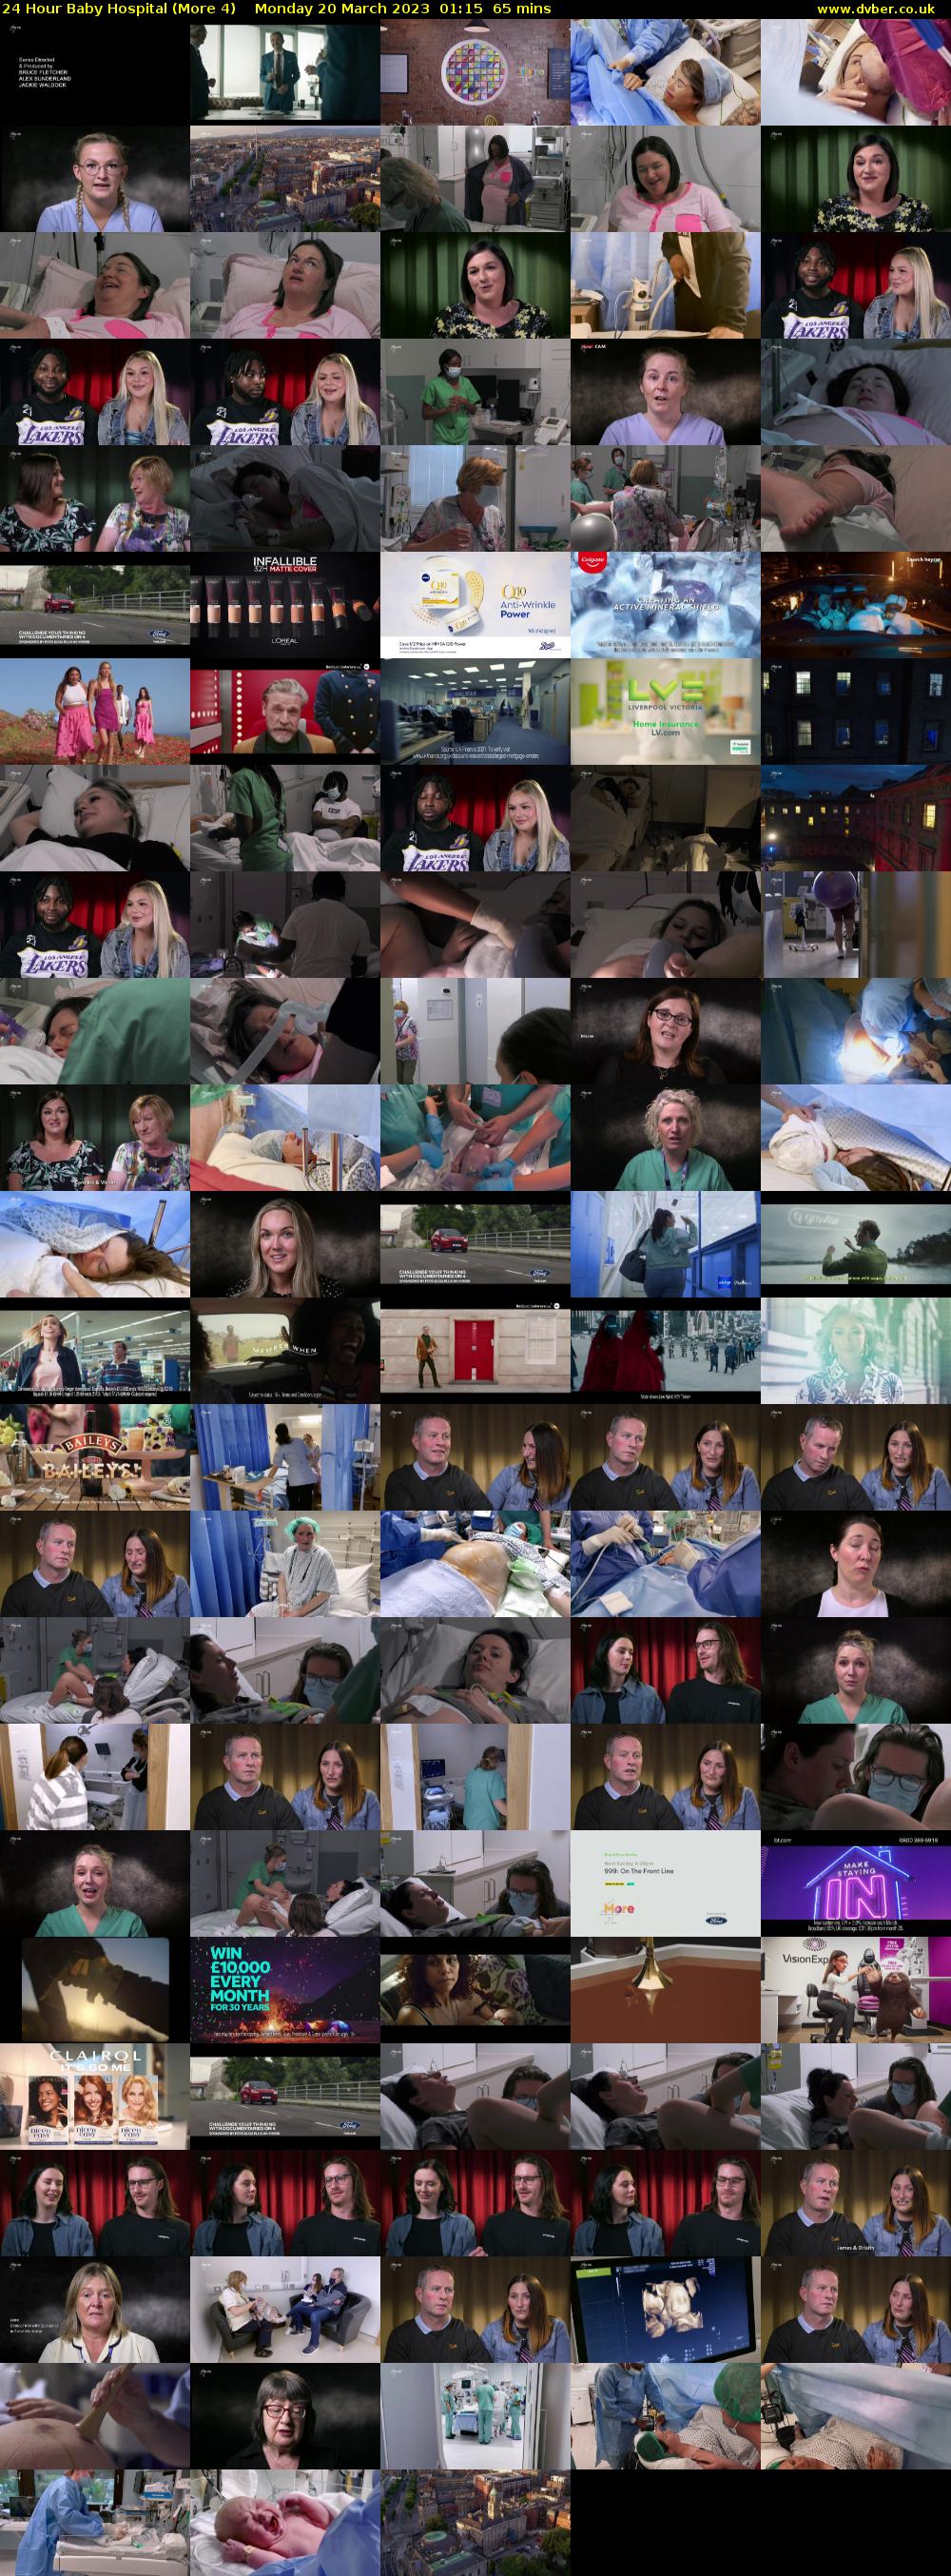 24 Hour Baby Hospital (More 4) Monday 20 March 2023 01:15 - 02:20